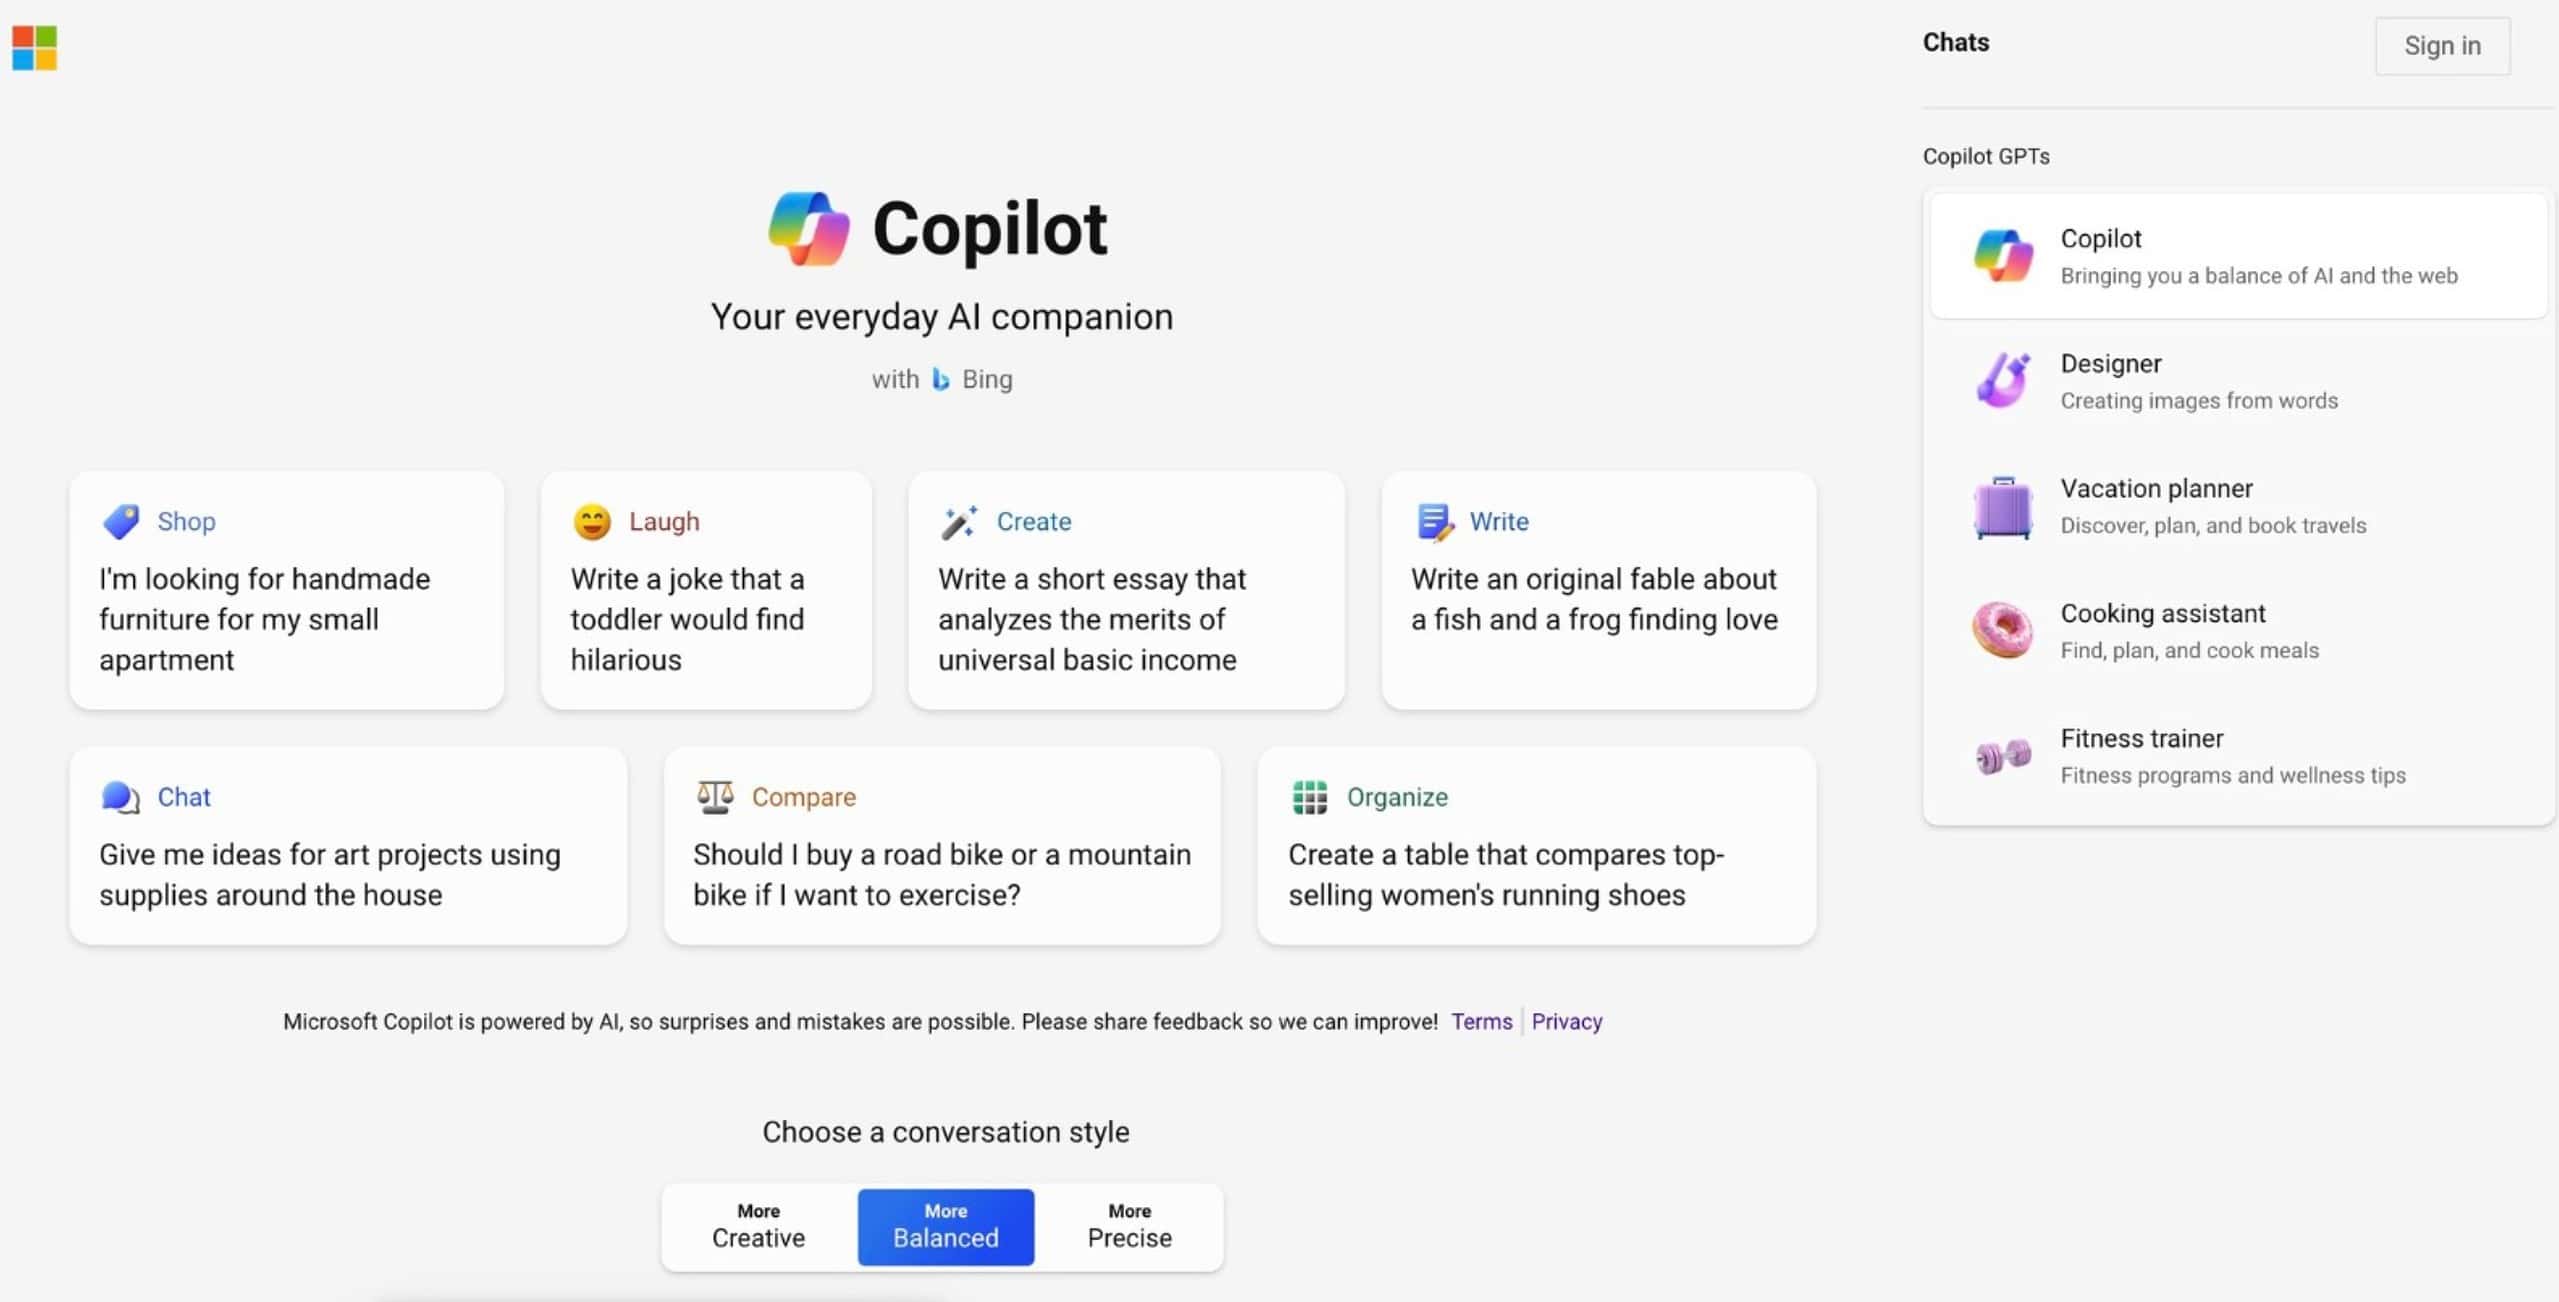 Microsoft expands availability of free Copilot GPTs to more customers